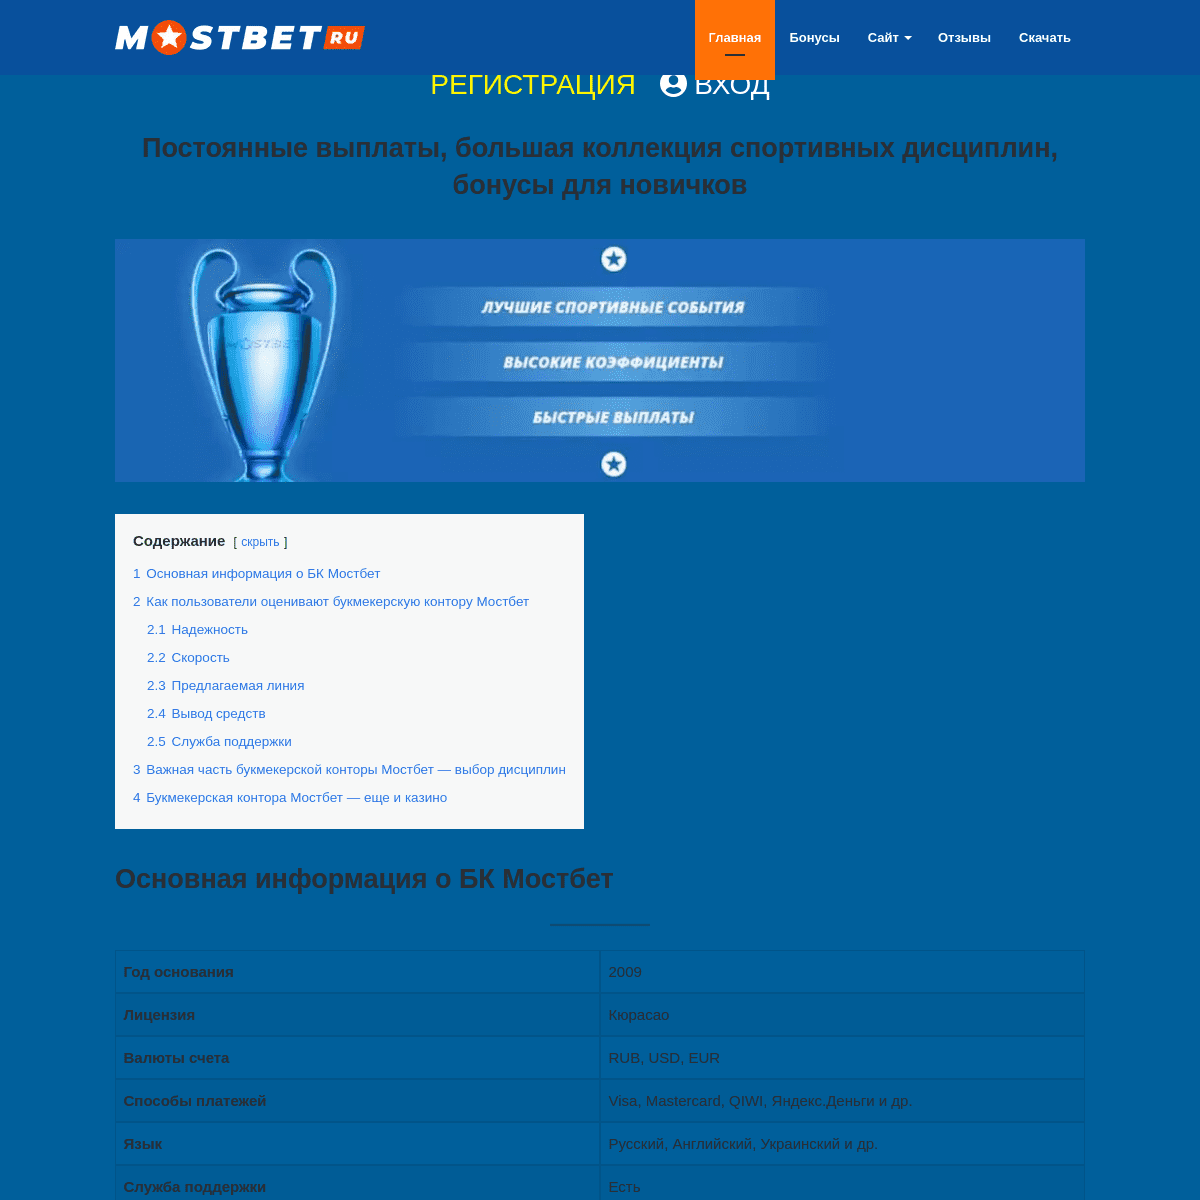 A complete backup of https://in-mostbet.ru